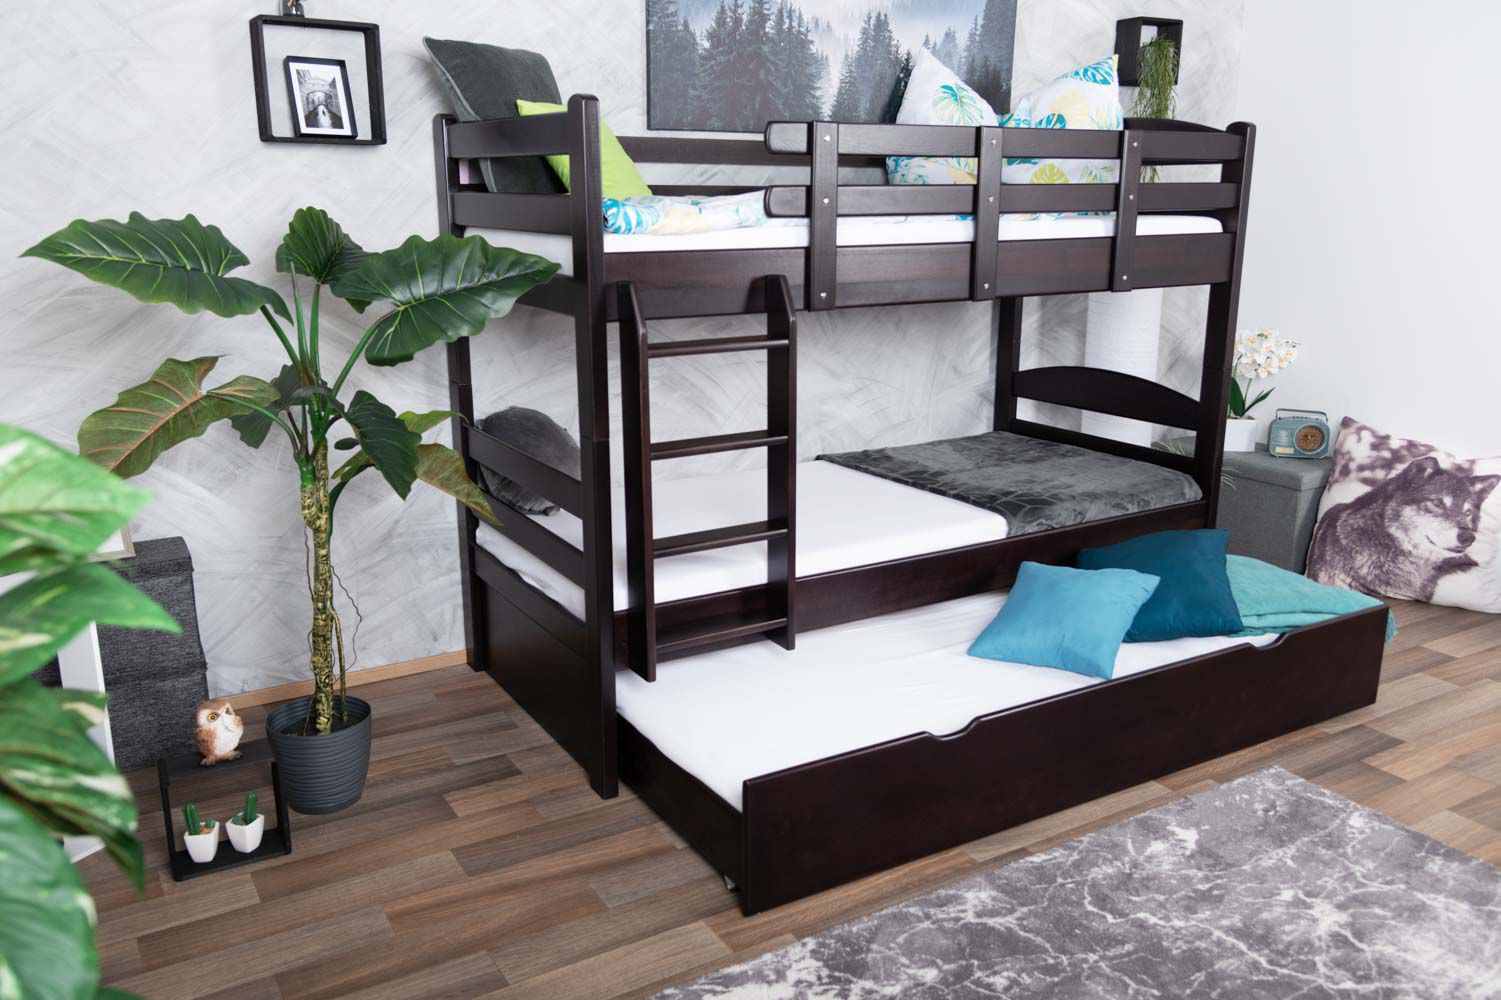 Bunk bed 90 x 200 cm "Easy Premium Line" K17/n incl. berth and 2 cover panels, solid beech wood, chocolate brown lacquered, convertible